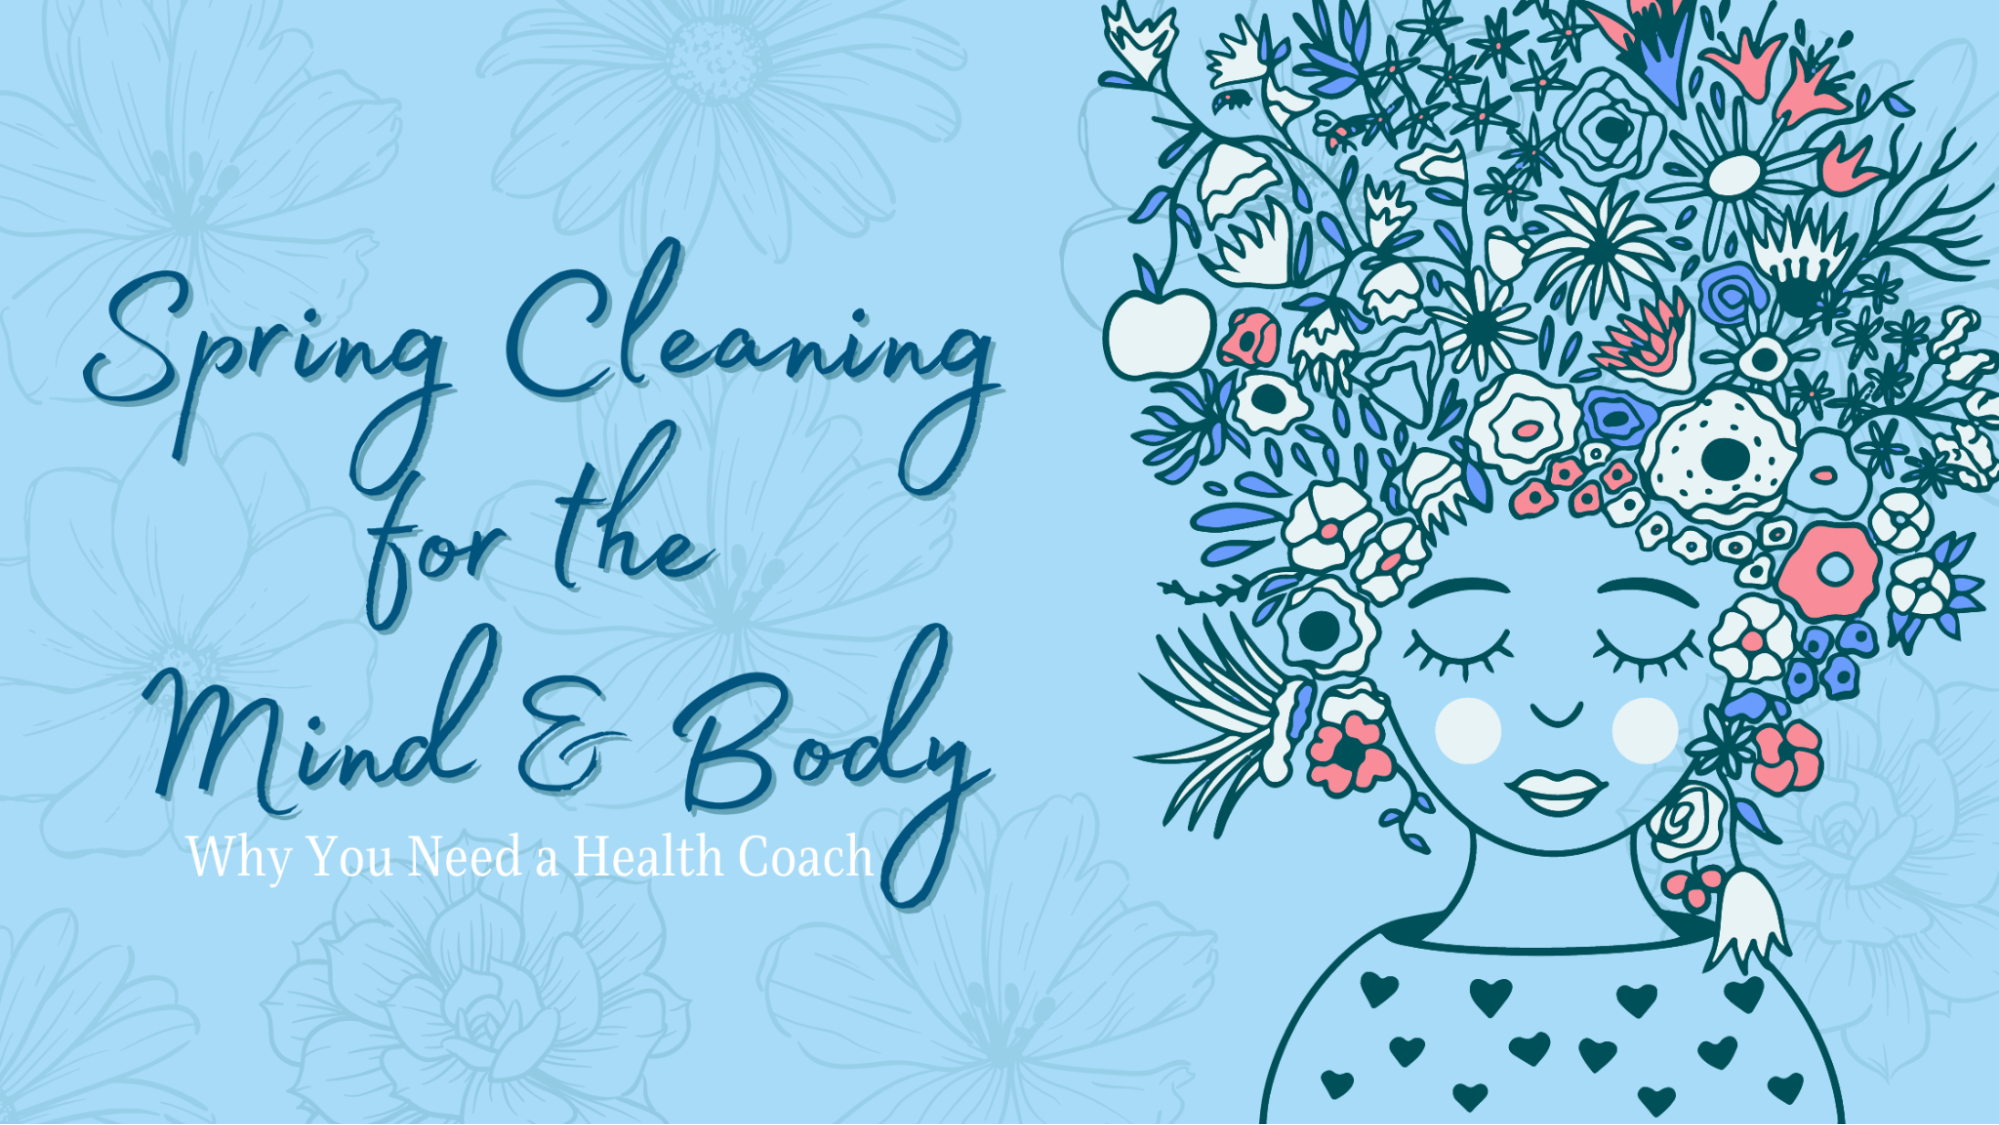 Spring Cleaning for the Mind & Body